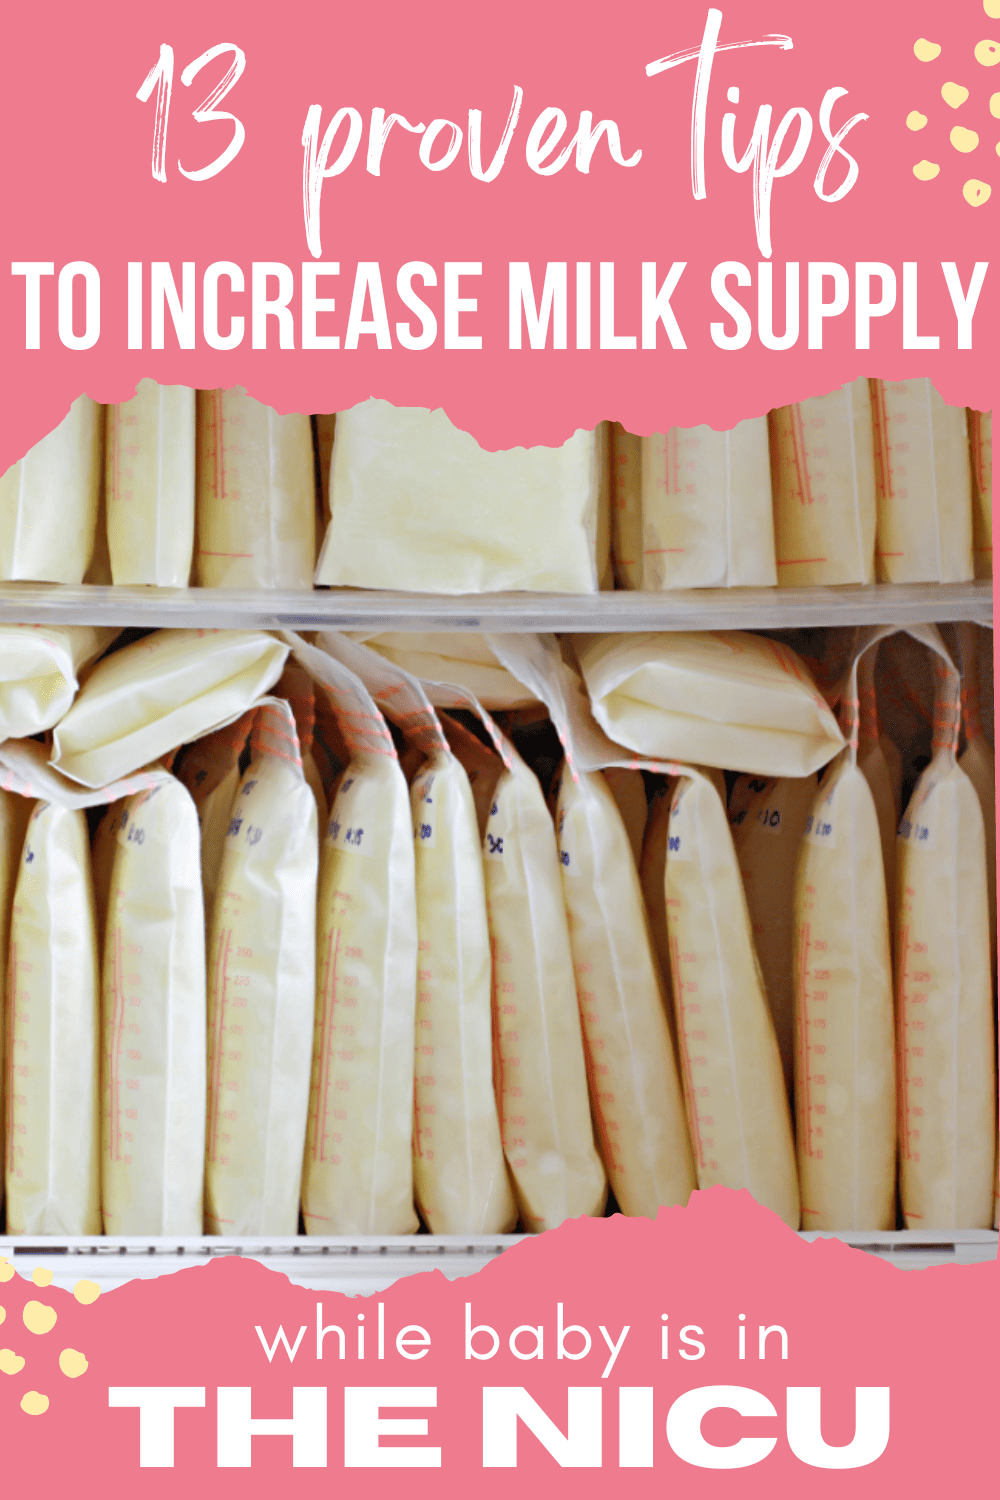 how to keep milk supply up while baby is in the NICU